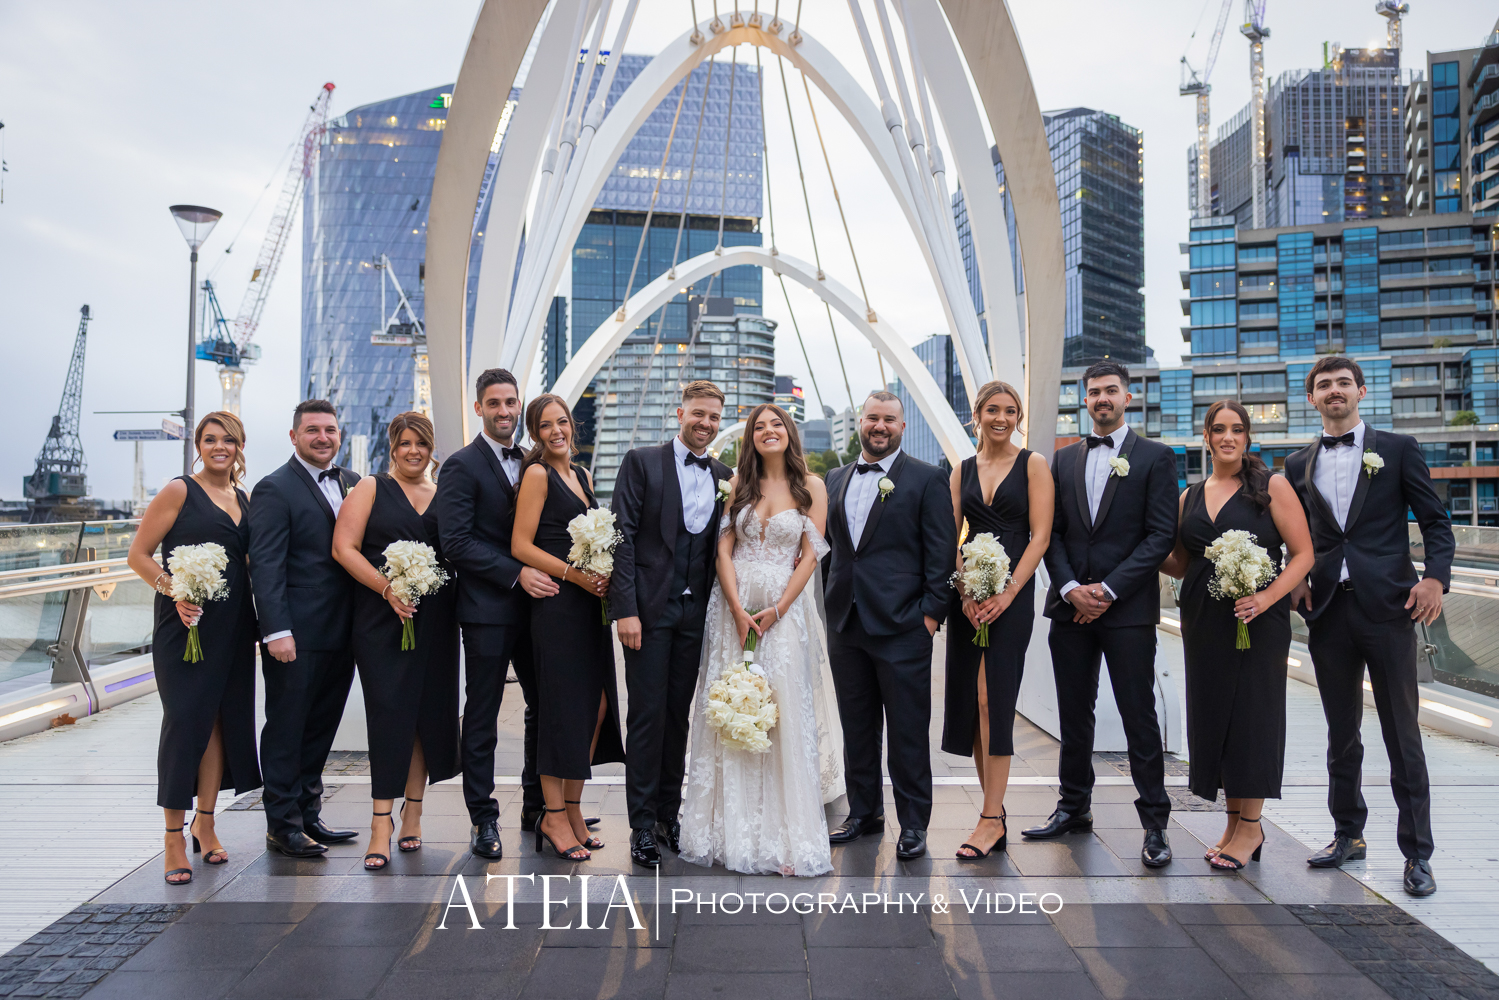 , Cassandra and David&#8217;s wedding at Showtime Events Docklands captured by ATEIA Photography &#038; Video